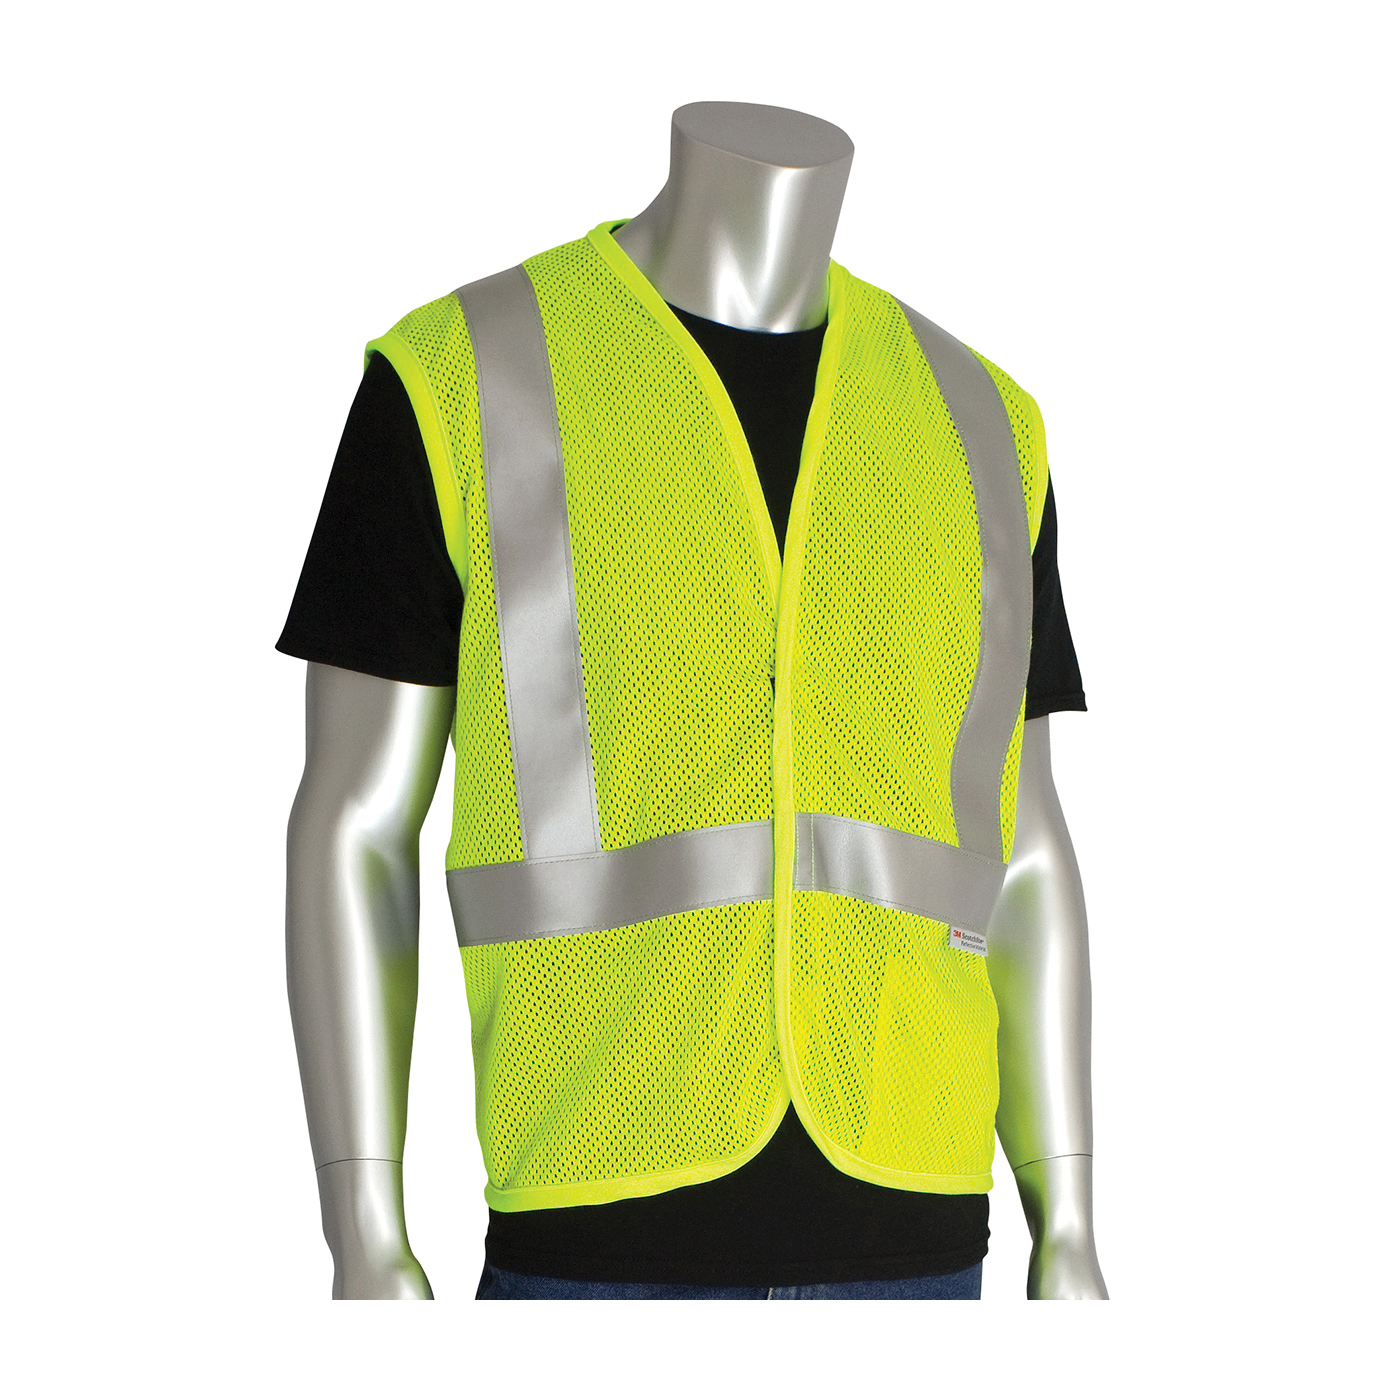 PIP® 305-2100-2X Arc and Flame Resistant Vest, 2XL, Hi-Viz Lime Yellow, Solid GlenGuard® Modacrylic/Aramid Blend Mesh Fabric, Hook and Loop Closure, 1 Pockets, ANSI Class: Class 2, Specifications Met: ANSI 107 Type R